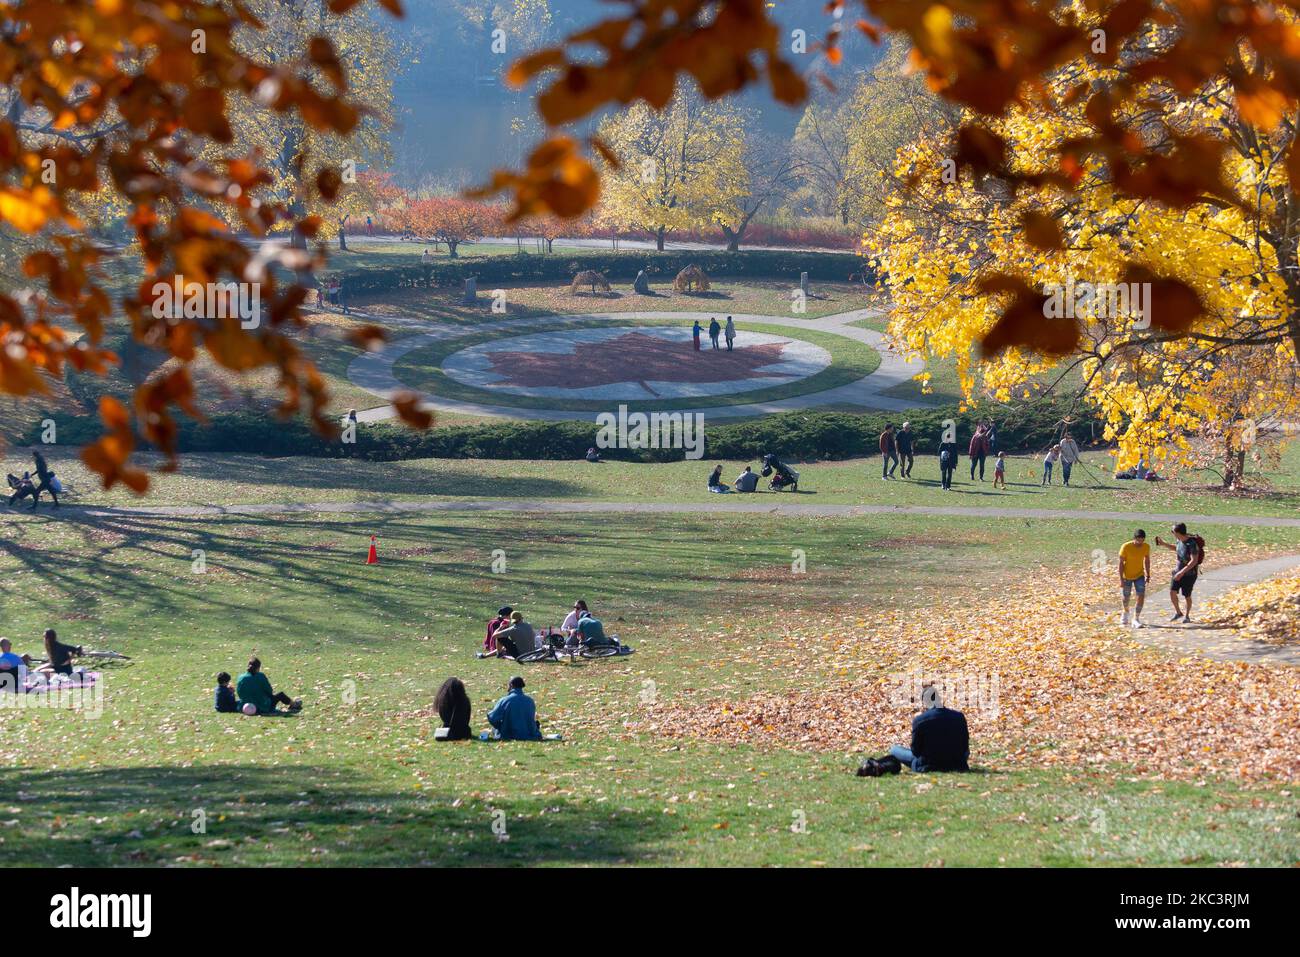 People enjoying a sunny day in High Park during unusually warm weather with temperatures reach 20 degrees Celsius on November 10, 2020 in High Park, Toronto, Canada. (Photo by Anatoliy Cherkasov/NurPhoto) Stock Photo